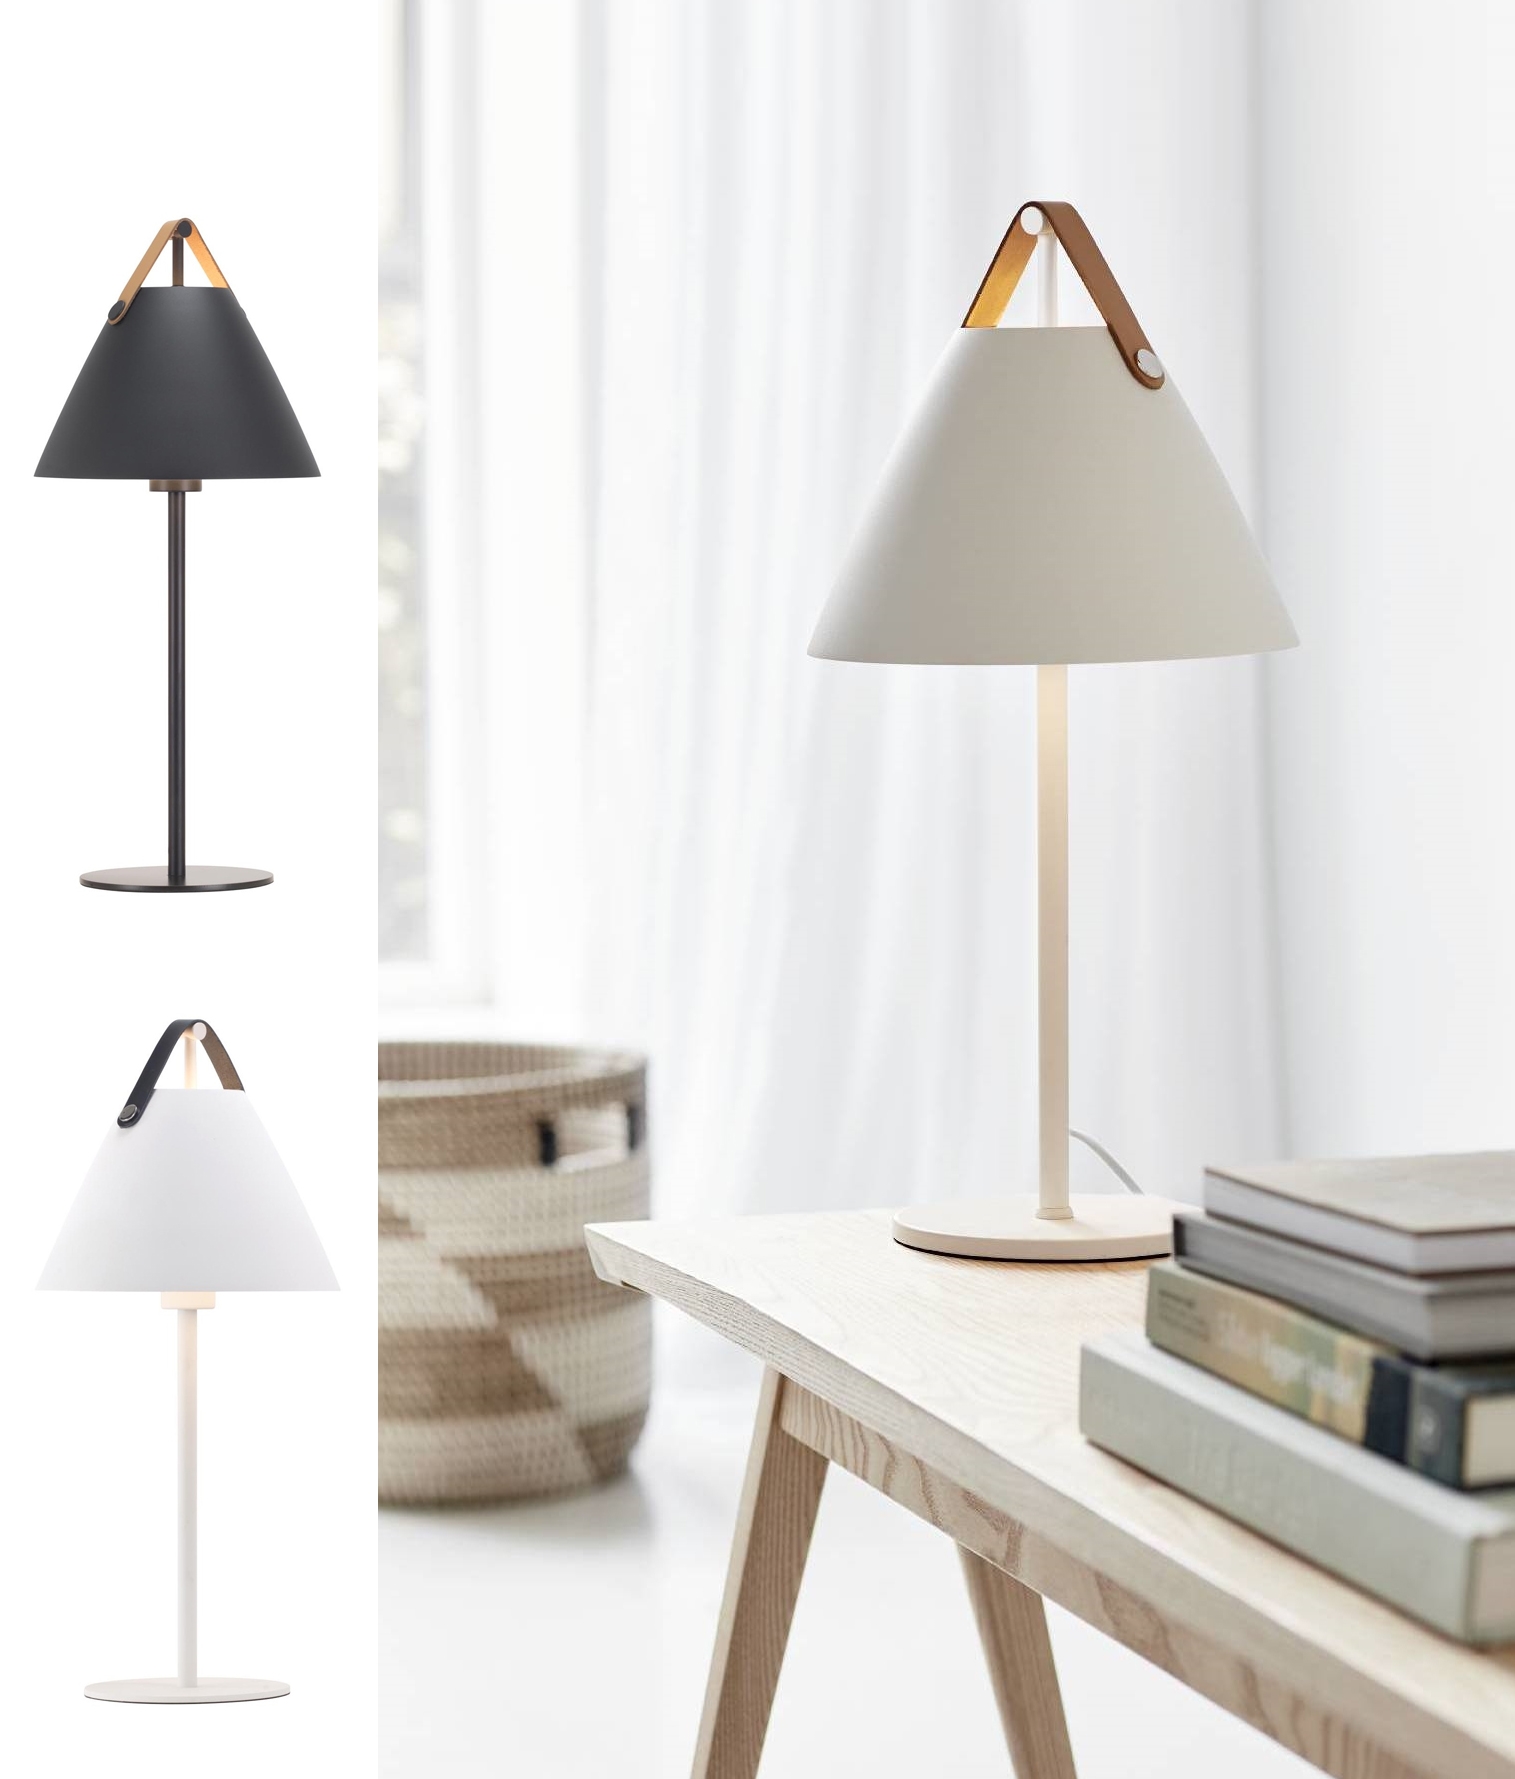 Metal Table Lamp With Leather Strap, Contemporary Table Lamps Uk